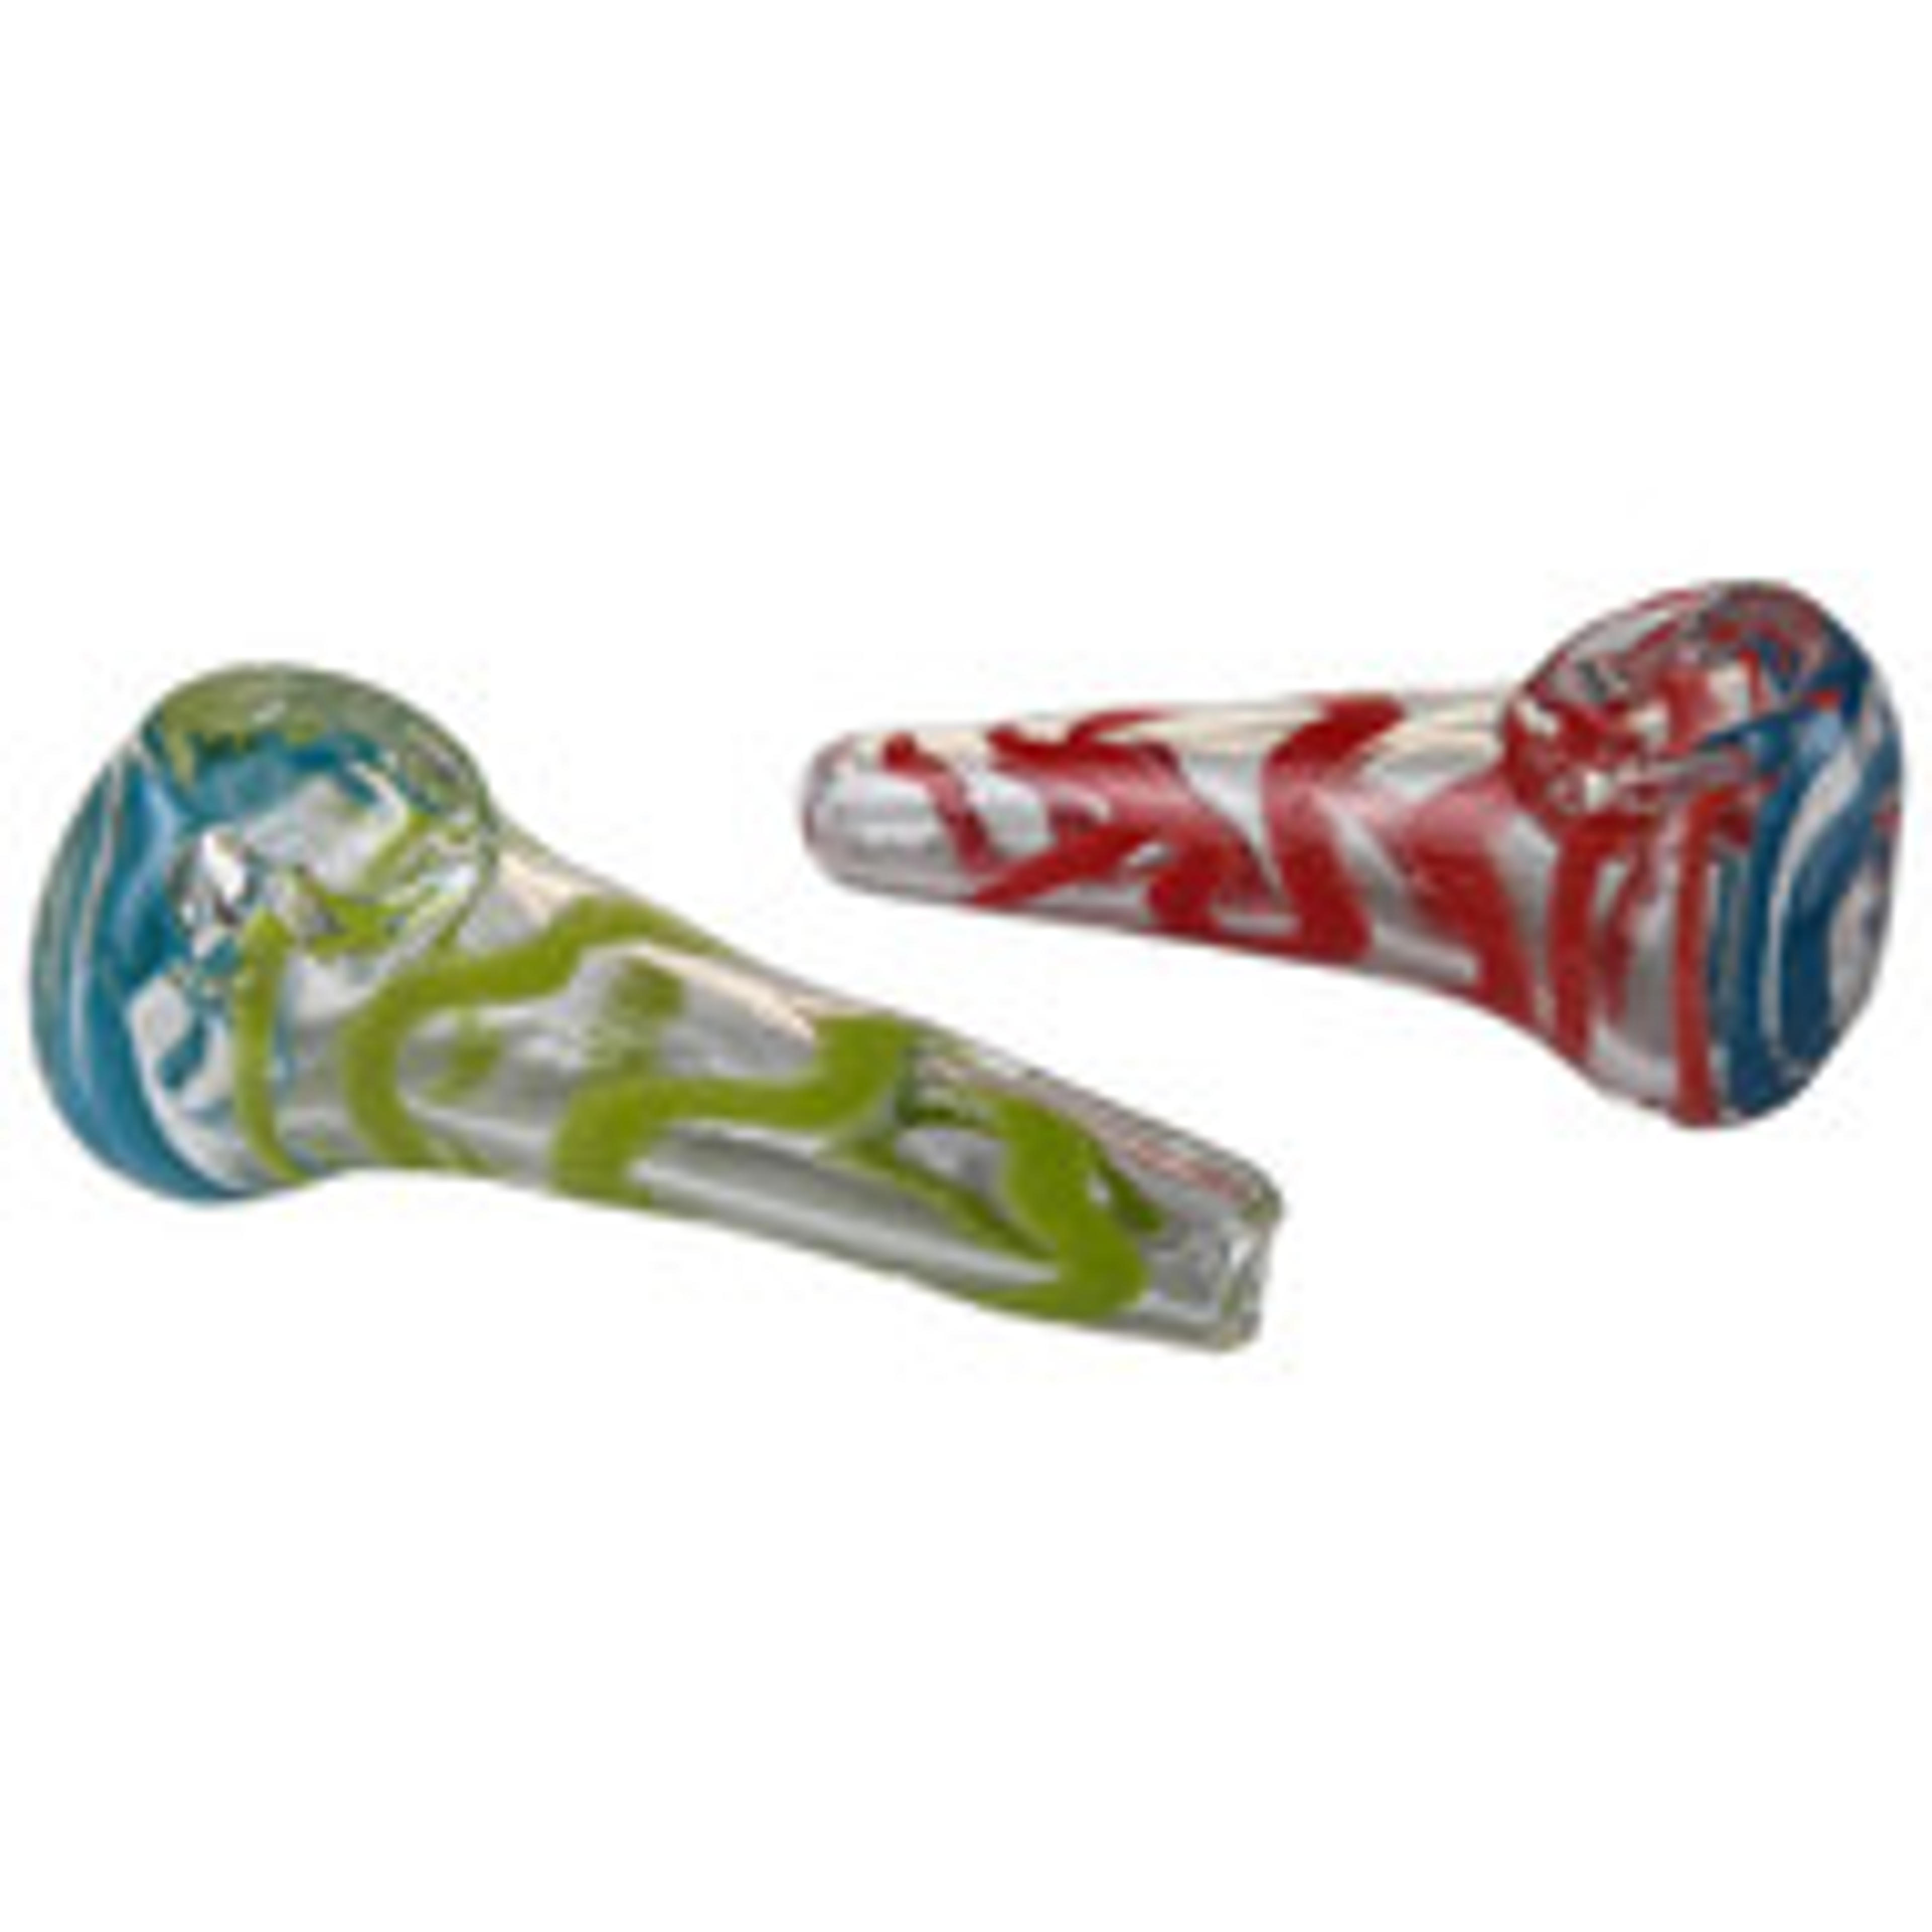 3" Assorted Dual Color Spiral Spoon Hand Pipe - 2 Pack (MSRP $20.00ea)